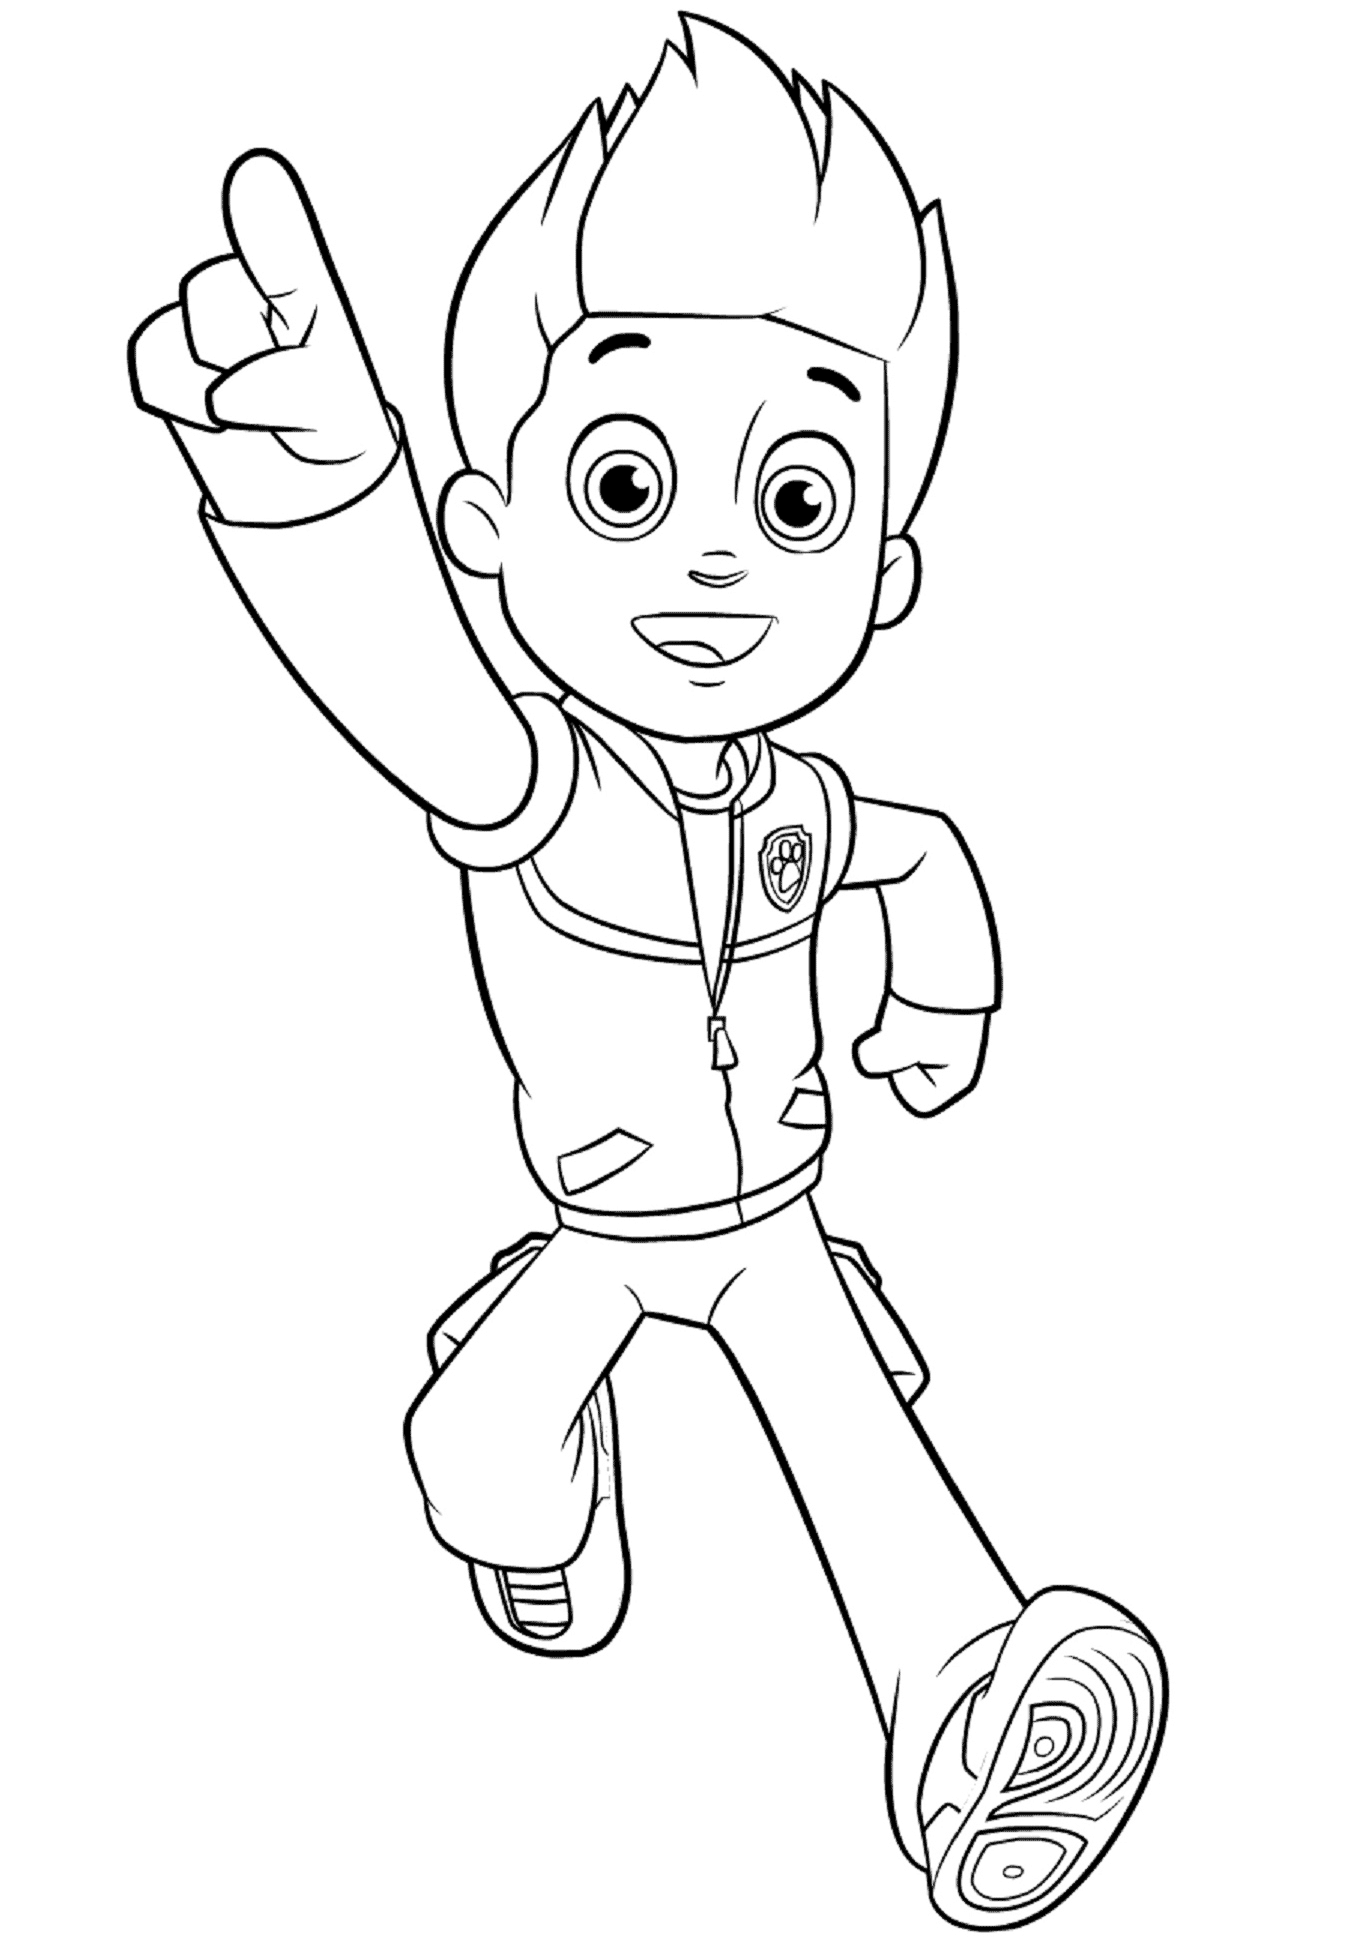 Click to see printable version of Feliz Ryder Coloring page